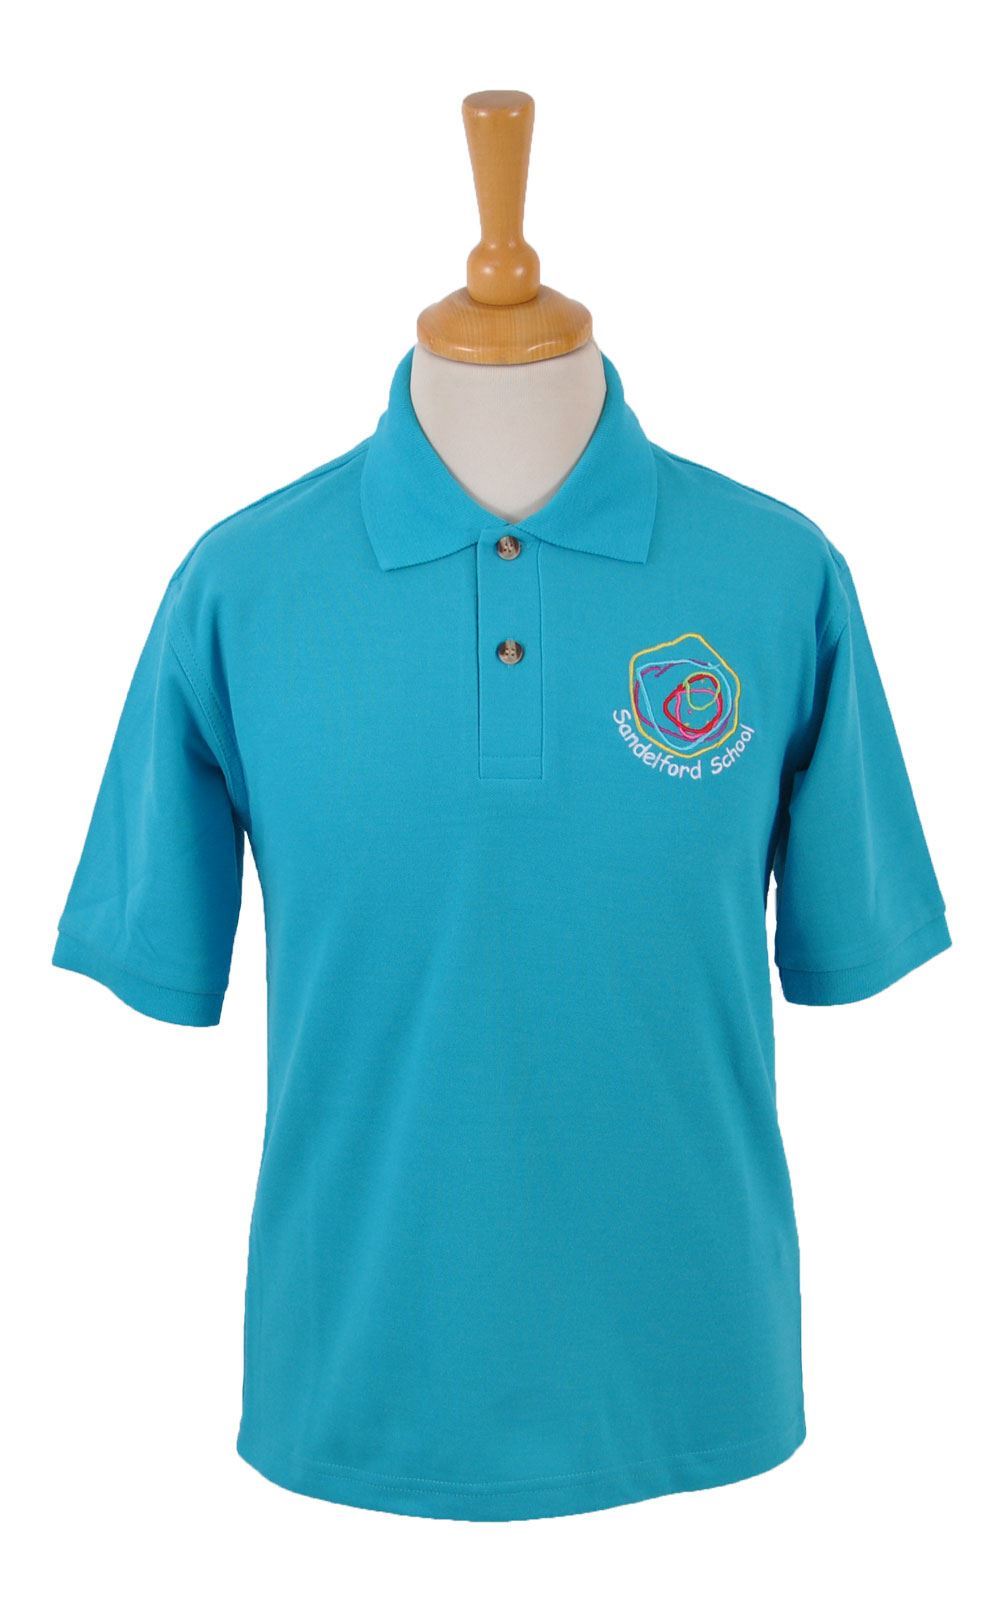 Picture of Sandelford School Turquoise Polo Shirt - Blue Max